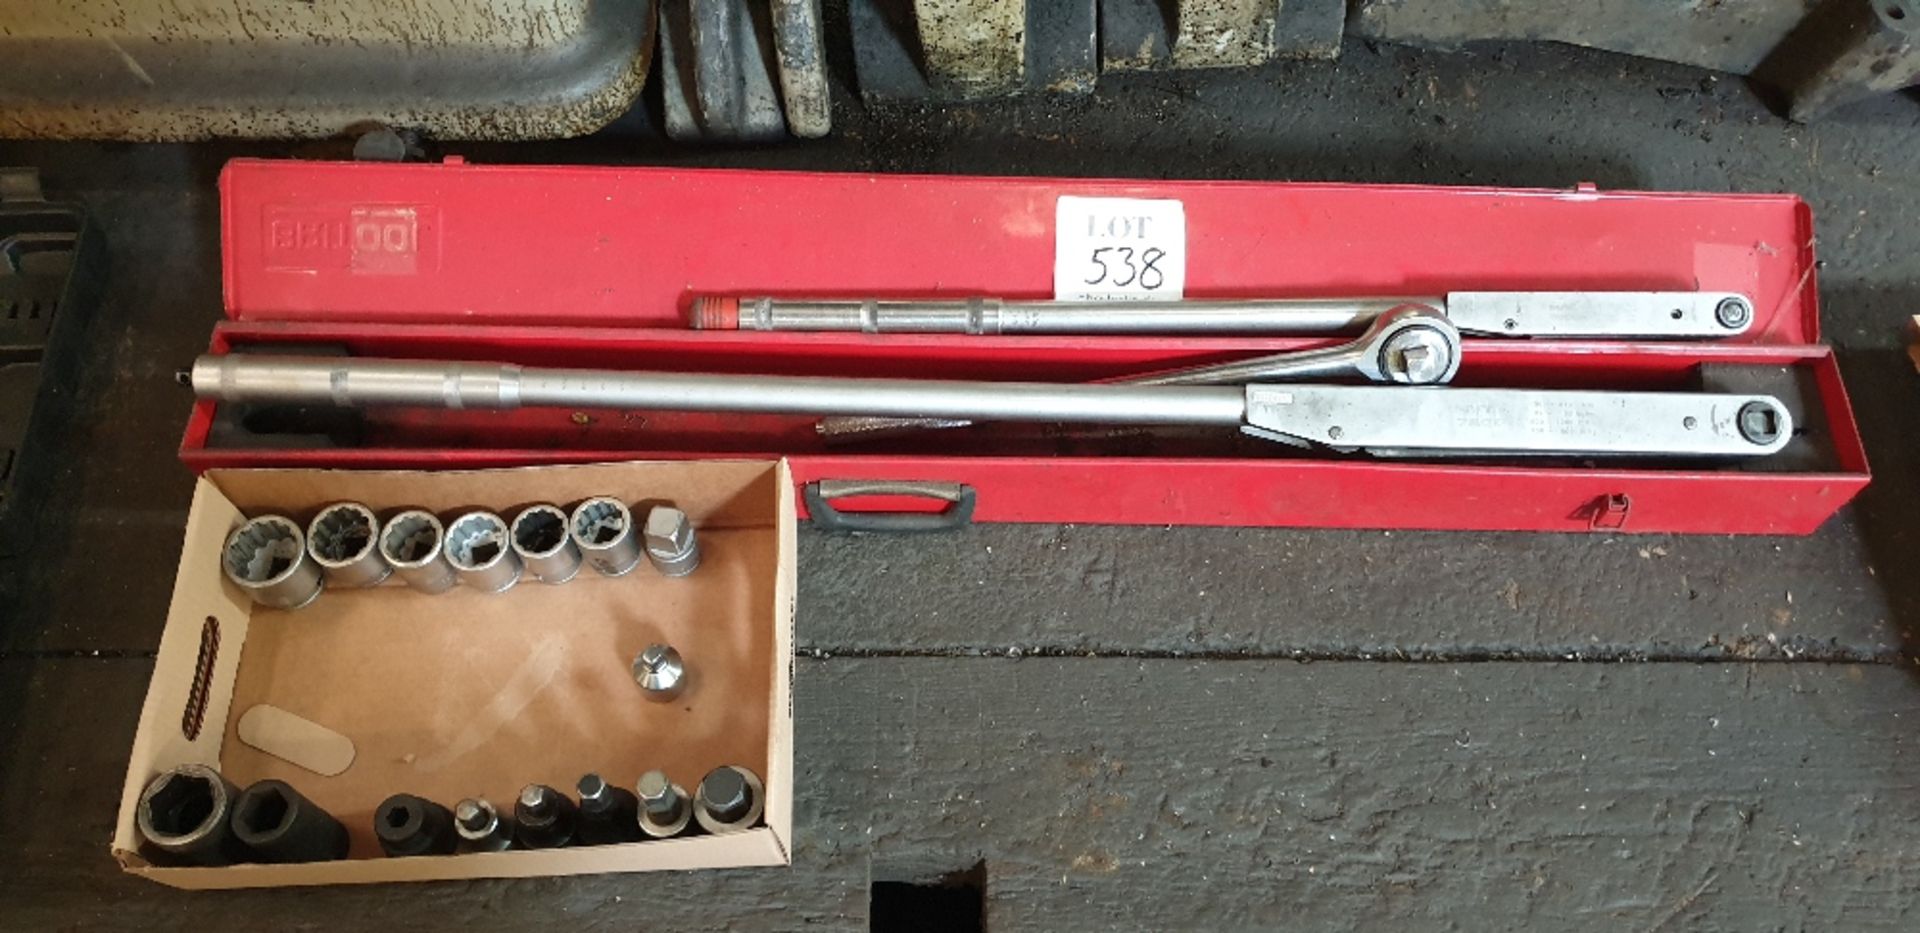 Ratchet and quantity of sockets. 2 - Britool Torque wrenches 1800 - 7200 Lb. Ft. In. and 500 -